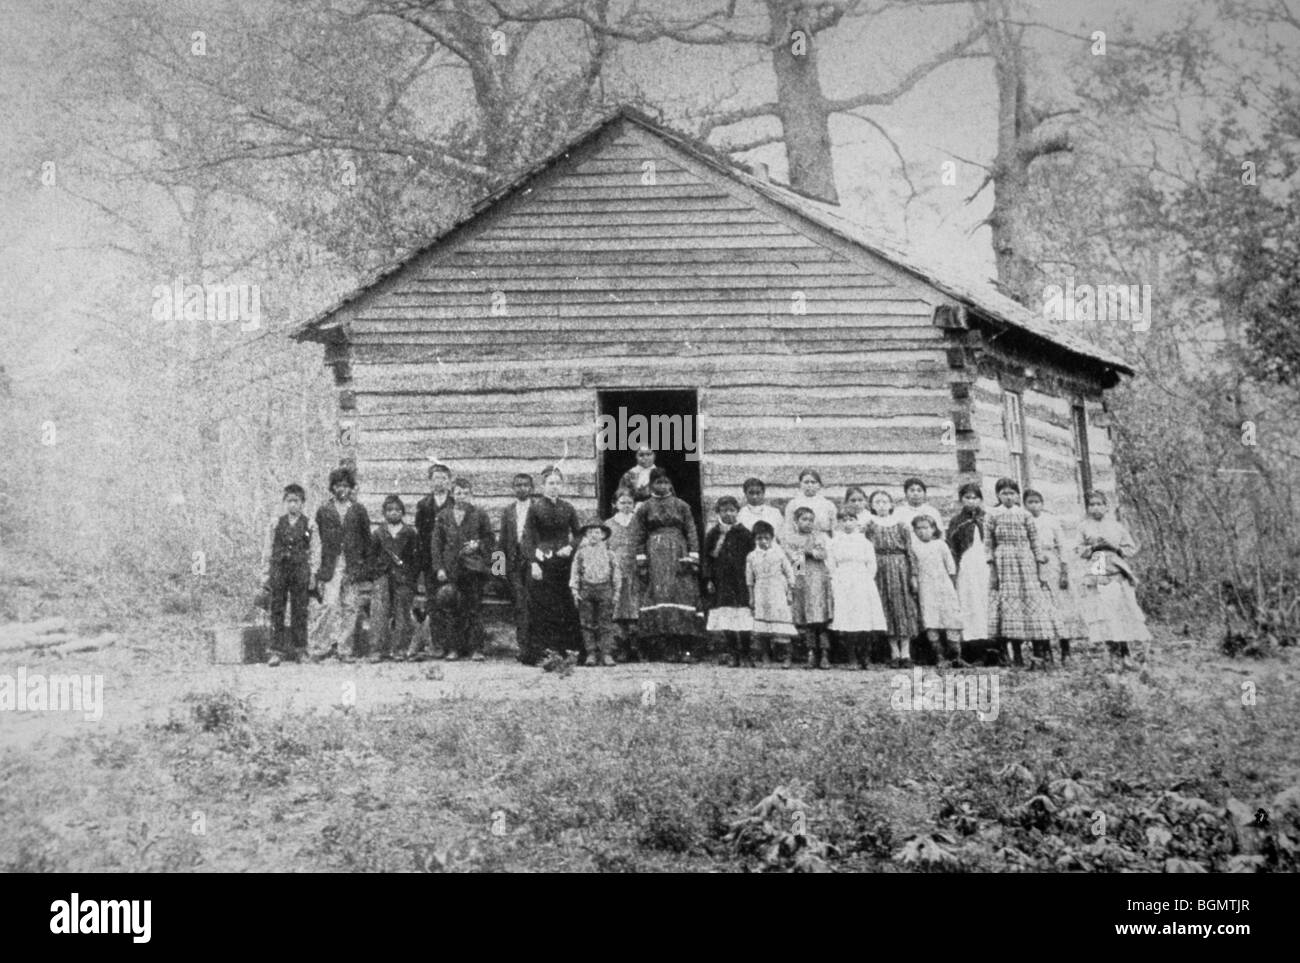 Historic photograph of Cherokee children standing in front of a school house built from logs located in Indian Territory, now known as Oklahoma Stock Photo